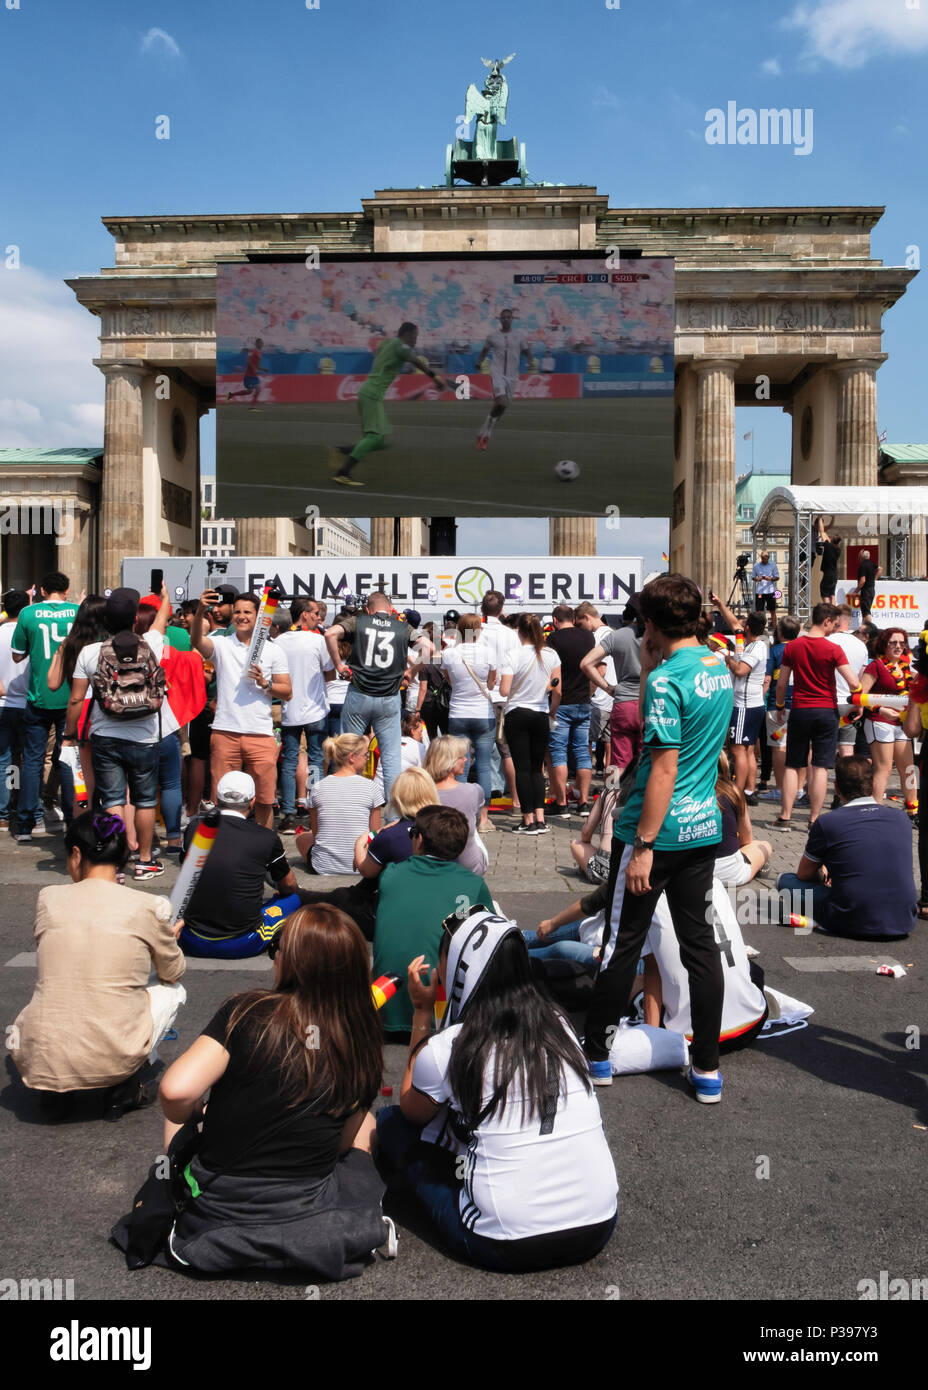 Berlin, Germany.. 17th June 2018. World Cup Football 2018.  Fans gather to watch the matches on giant screens placed along the Strasse on 17th June. The viewing area stretches for nearly two kilometres and the gigantic fan fest is known as the Fanmeile. Credit: Eden Breitz/Alamy Live News Stock Photo